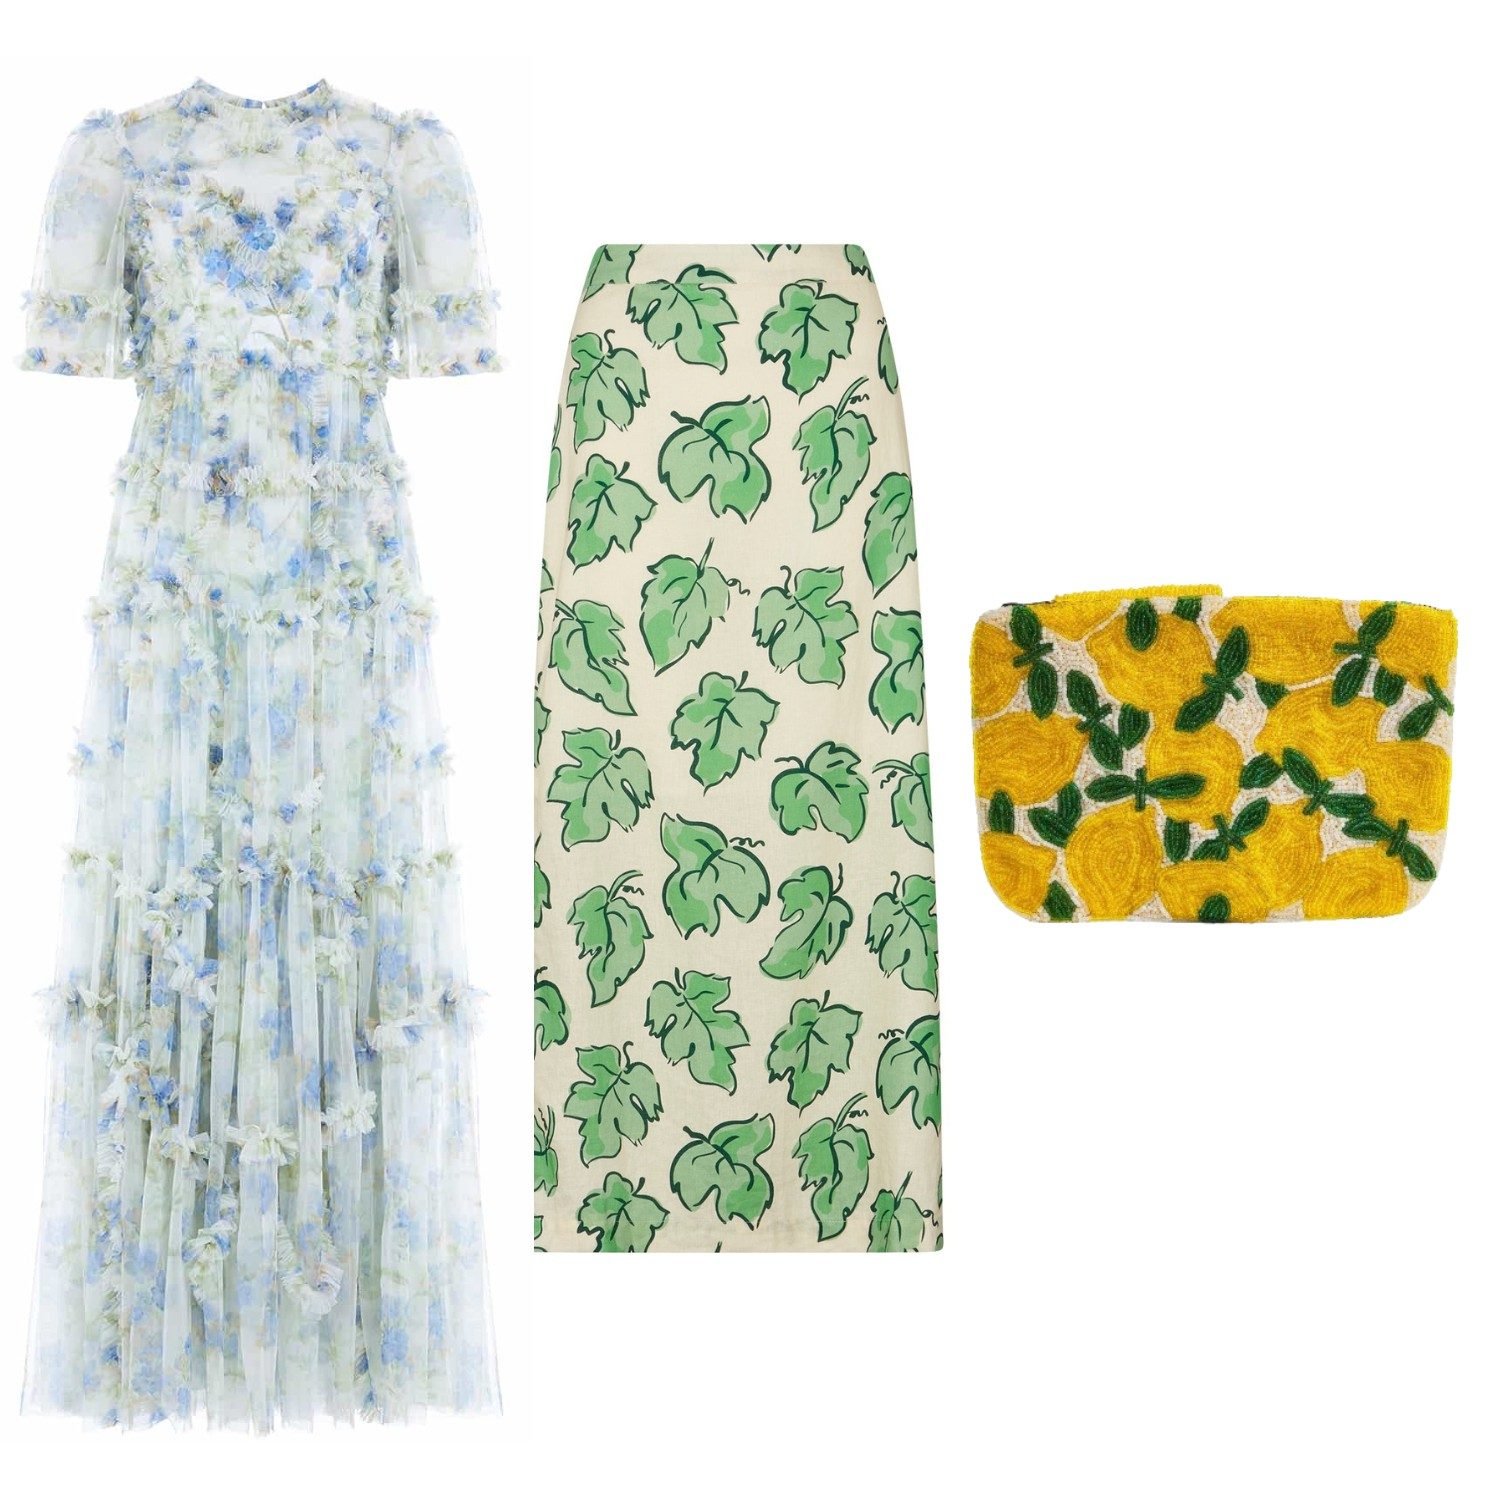 this summer’s most joyful trend? dressing like you’re going to an italian garden party